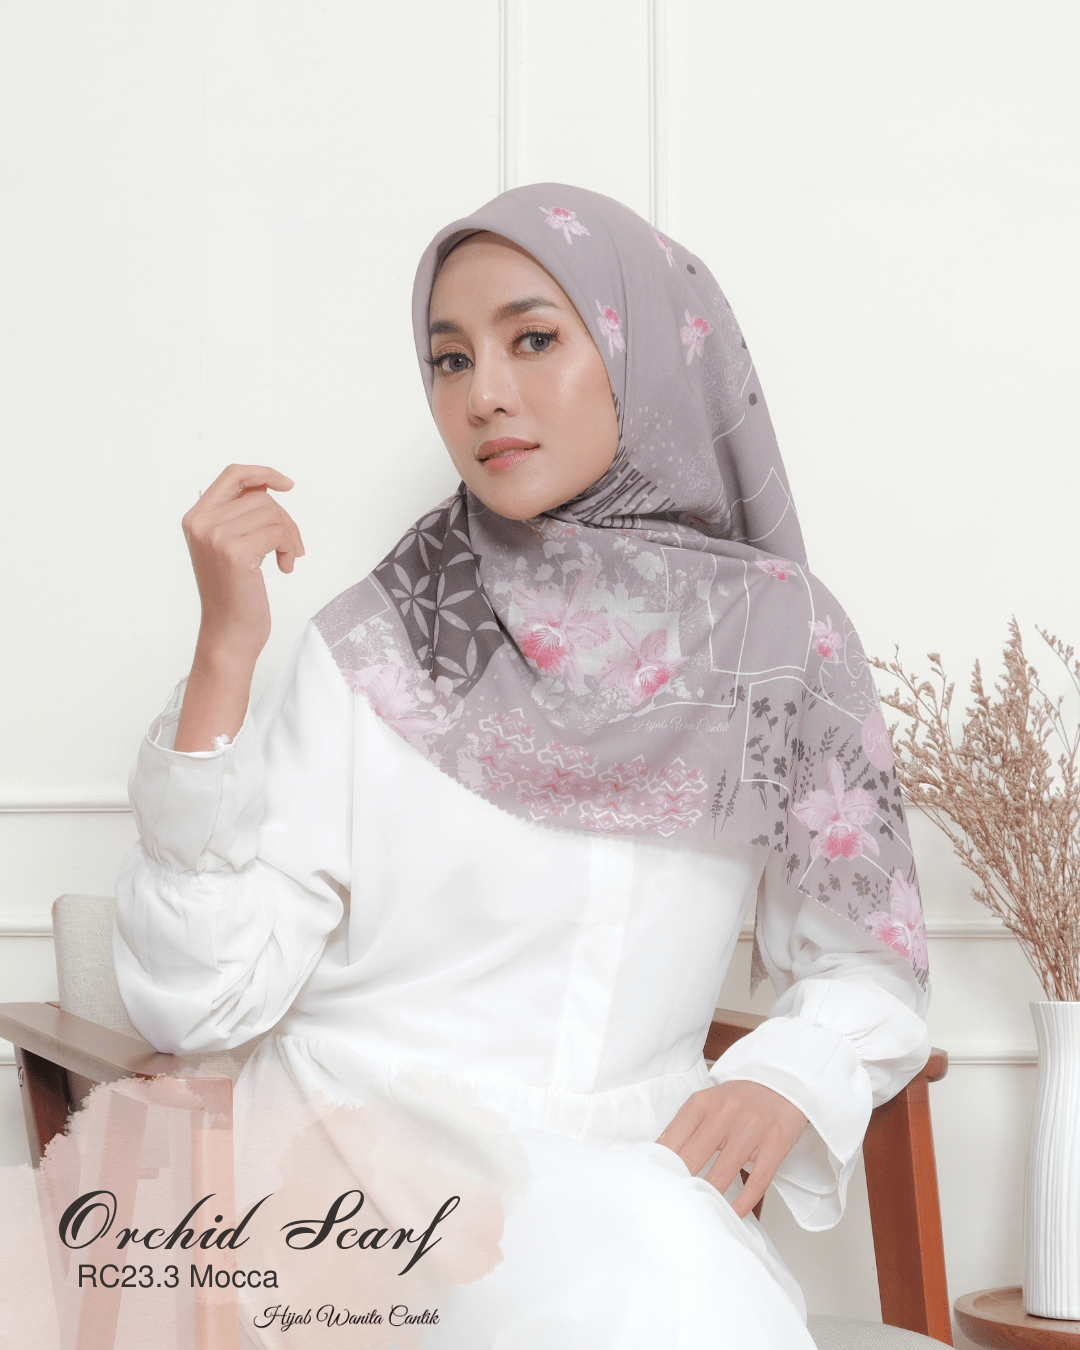 Orchid Scarf - RC23.3 Mocca